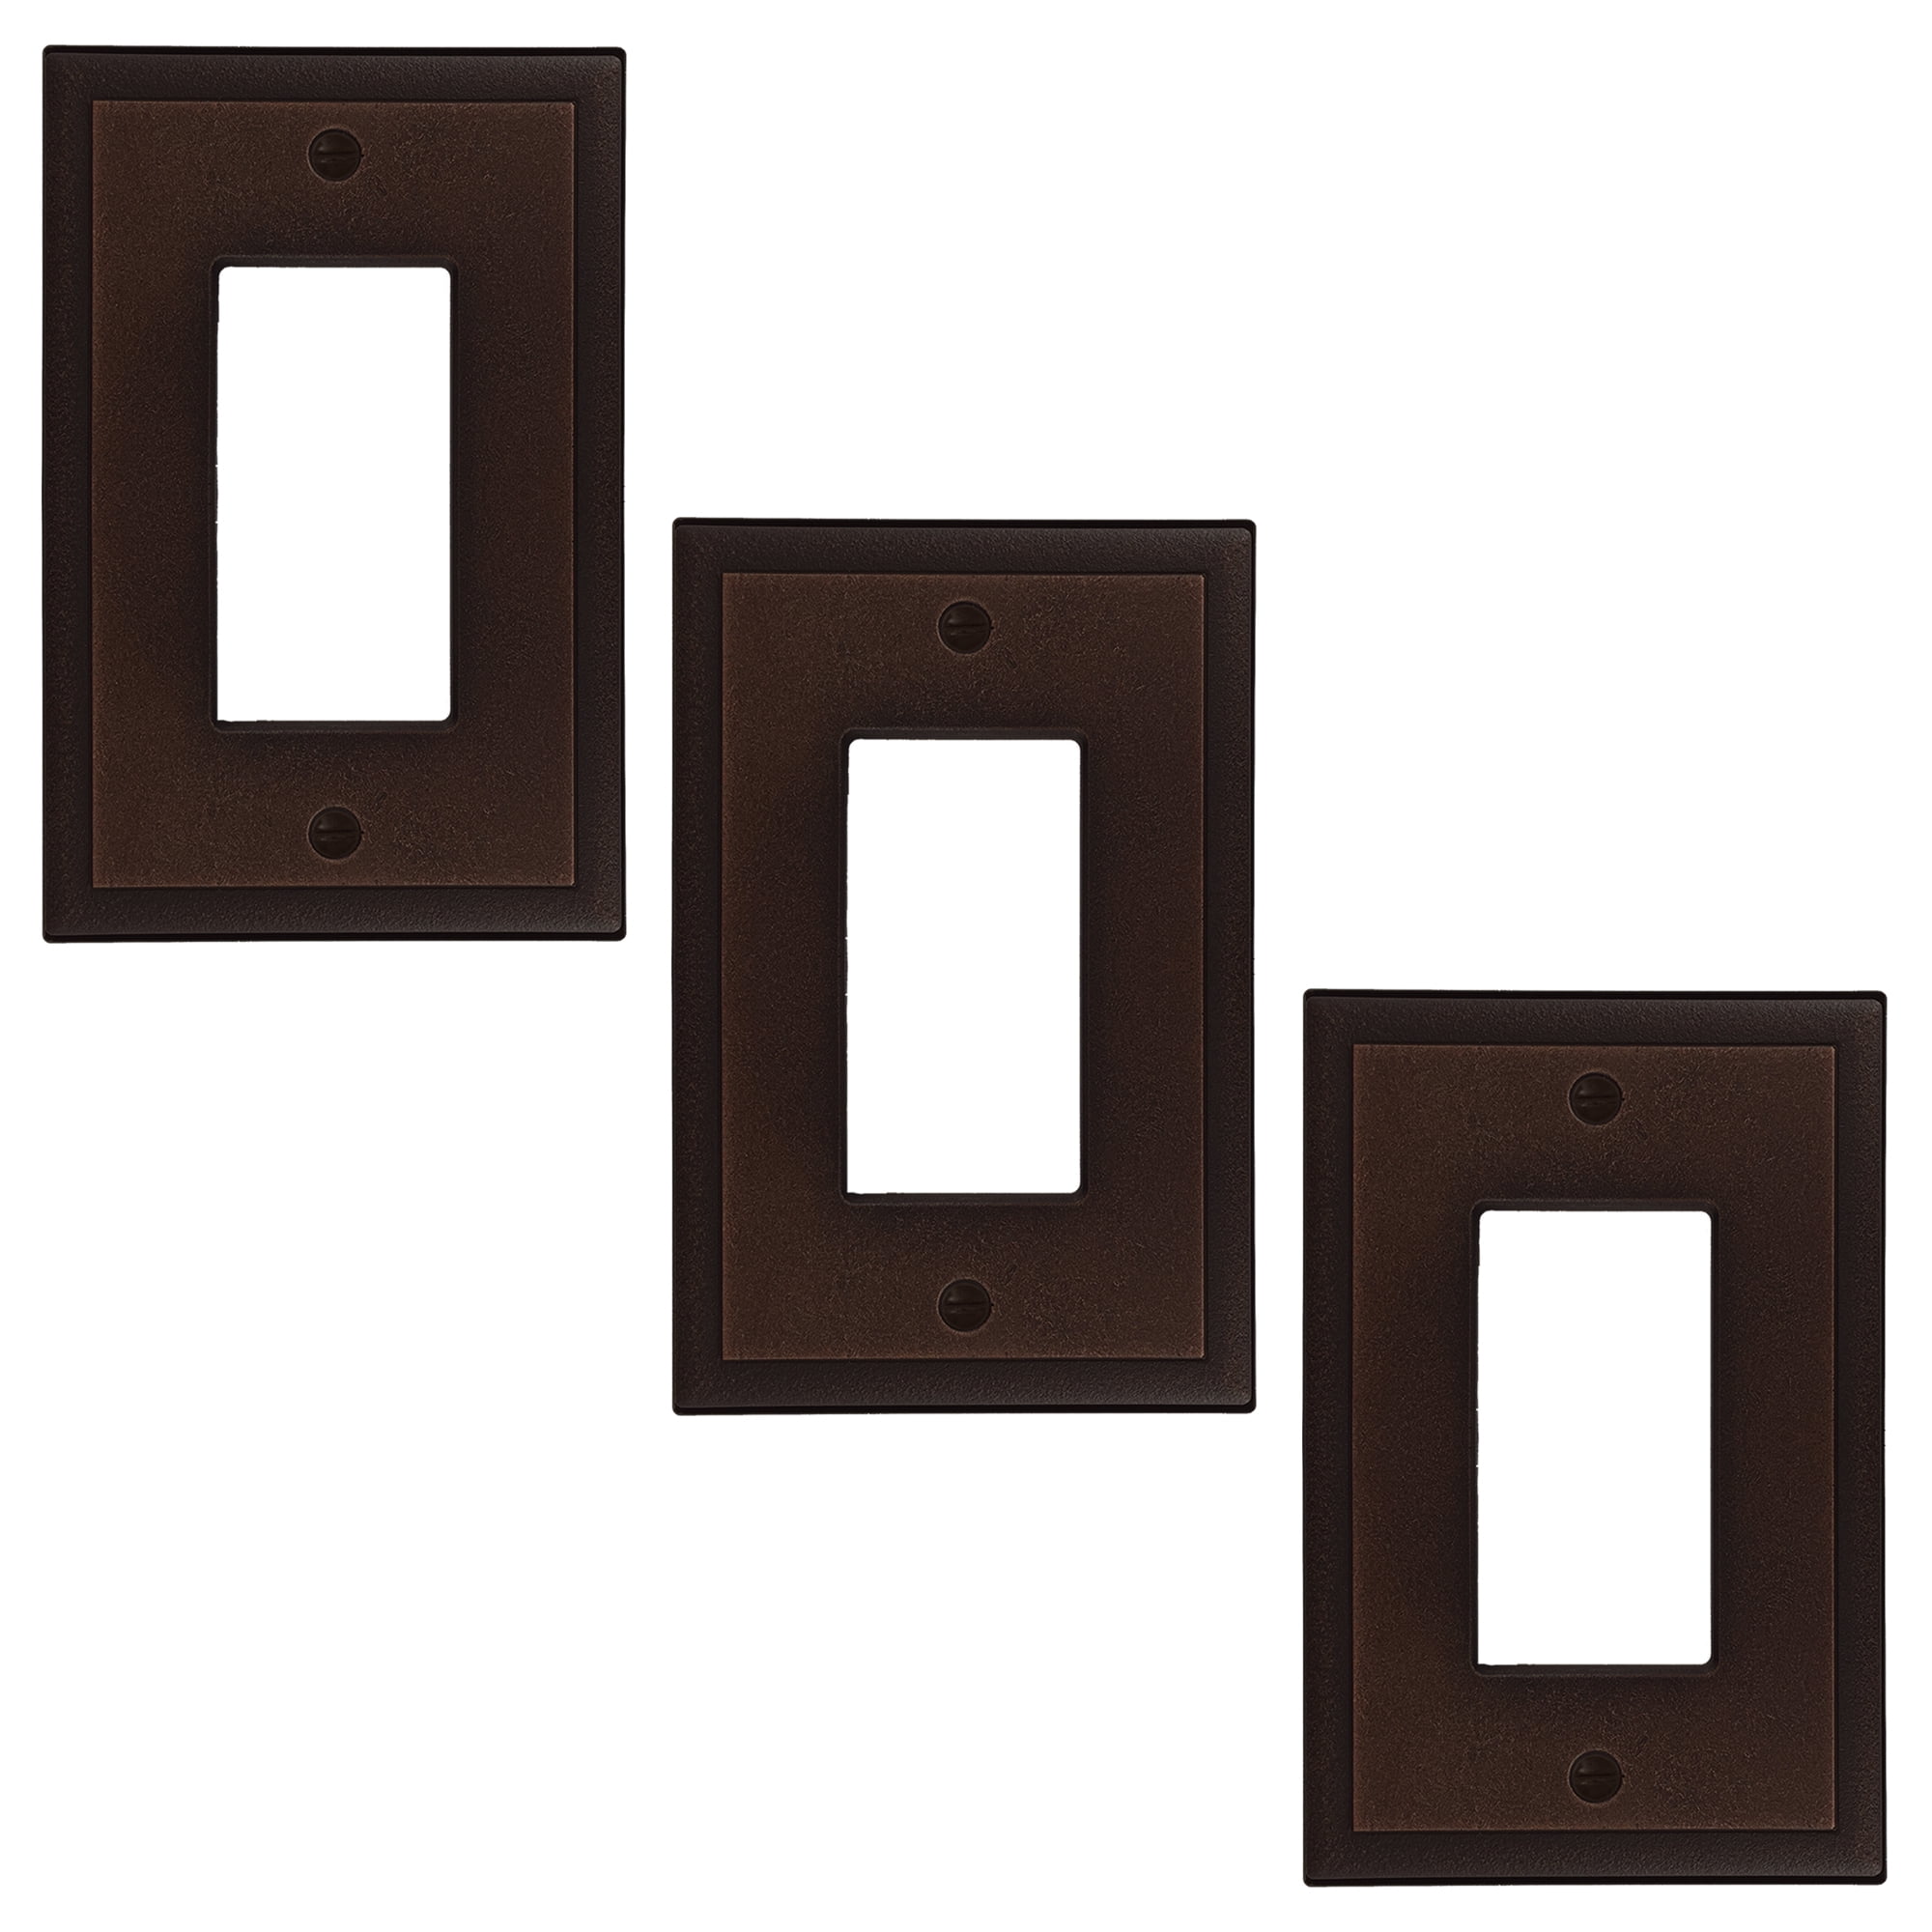 Questech Single Rocker Light Switch Cover Ambient Decorative Wall Plate Oil Rubbed Bronze Metal Finish